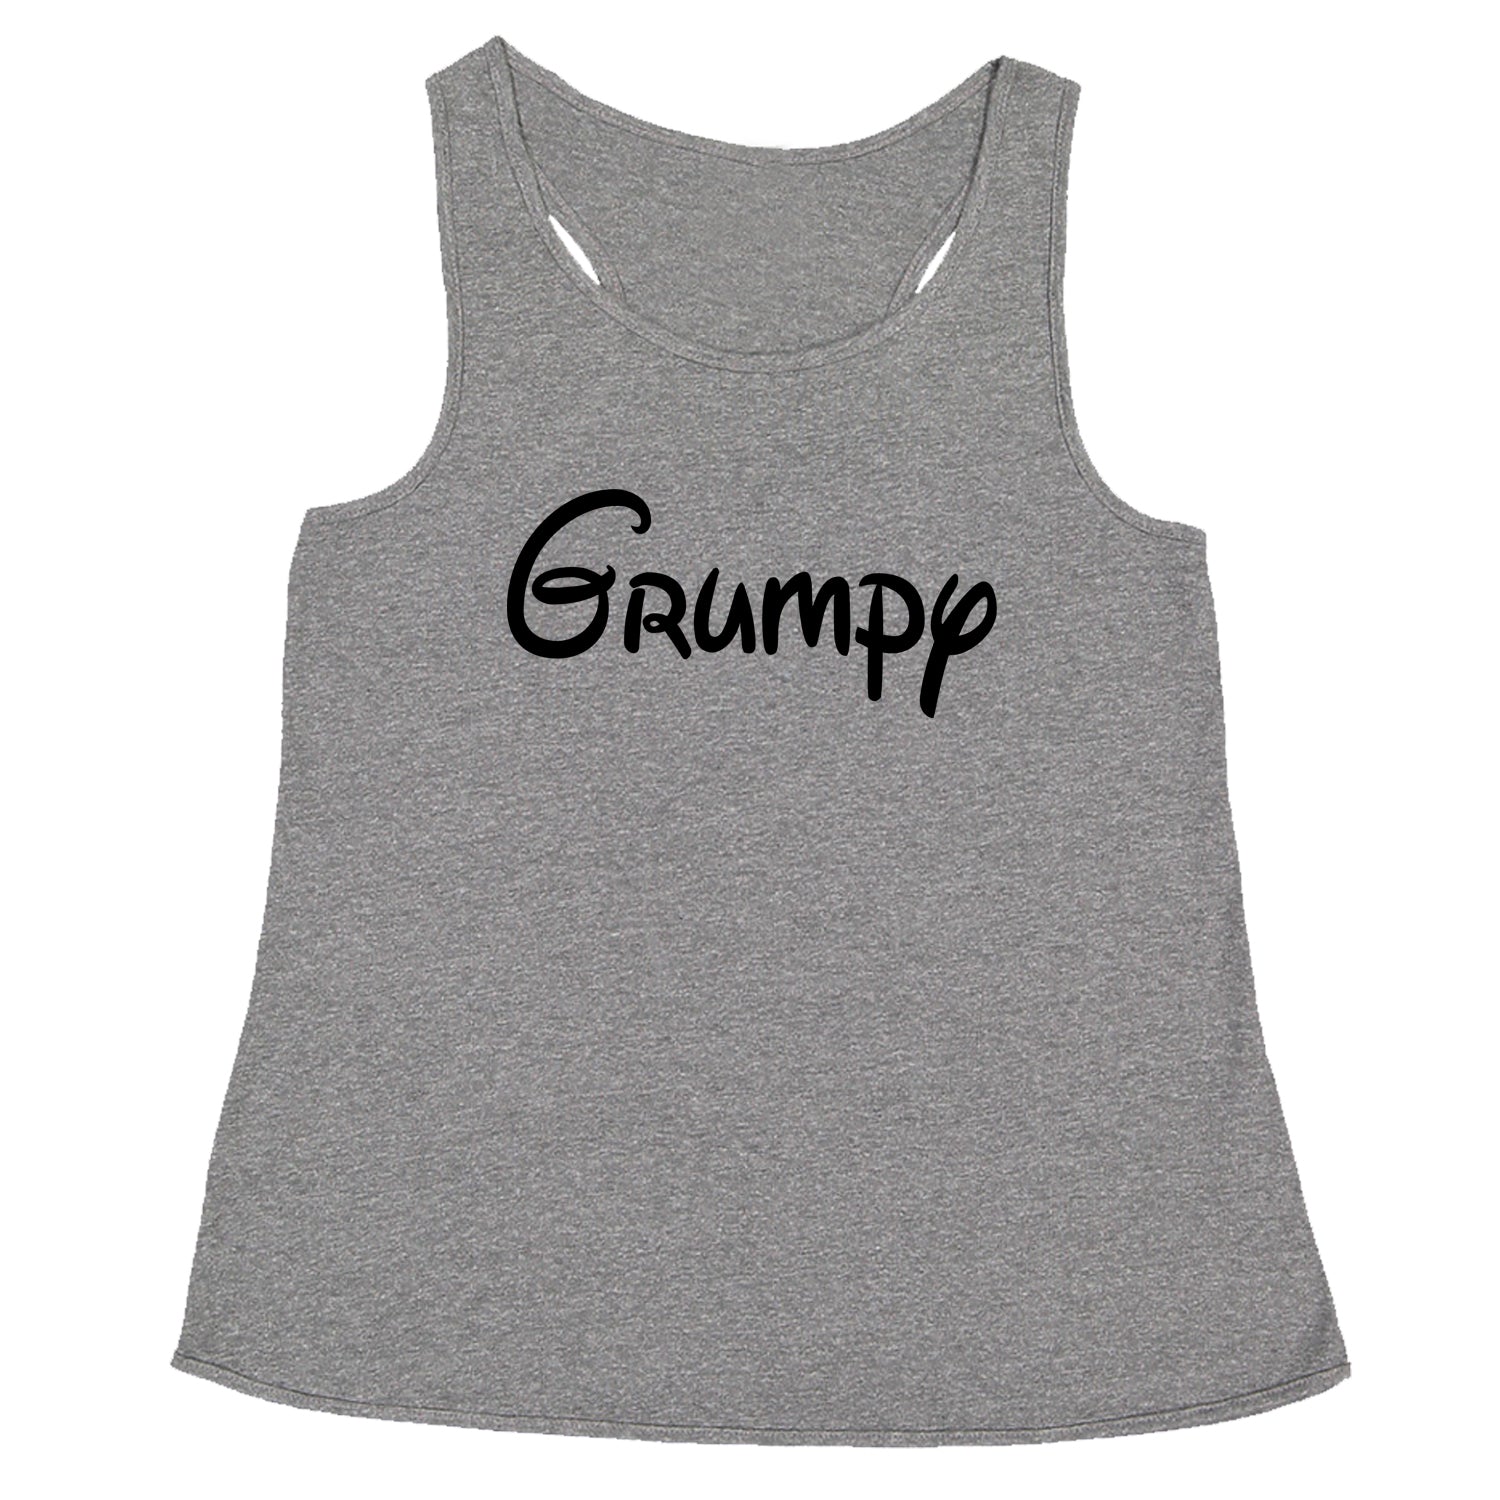 Grumpy - 7 Dwarfs Costume Racerback Tank Top for Women and, costume, dwarfs, group, halloween, matching, seven, snow, the, white by Expression Tees